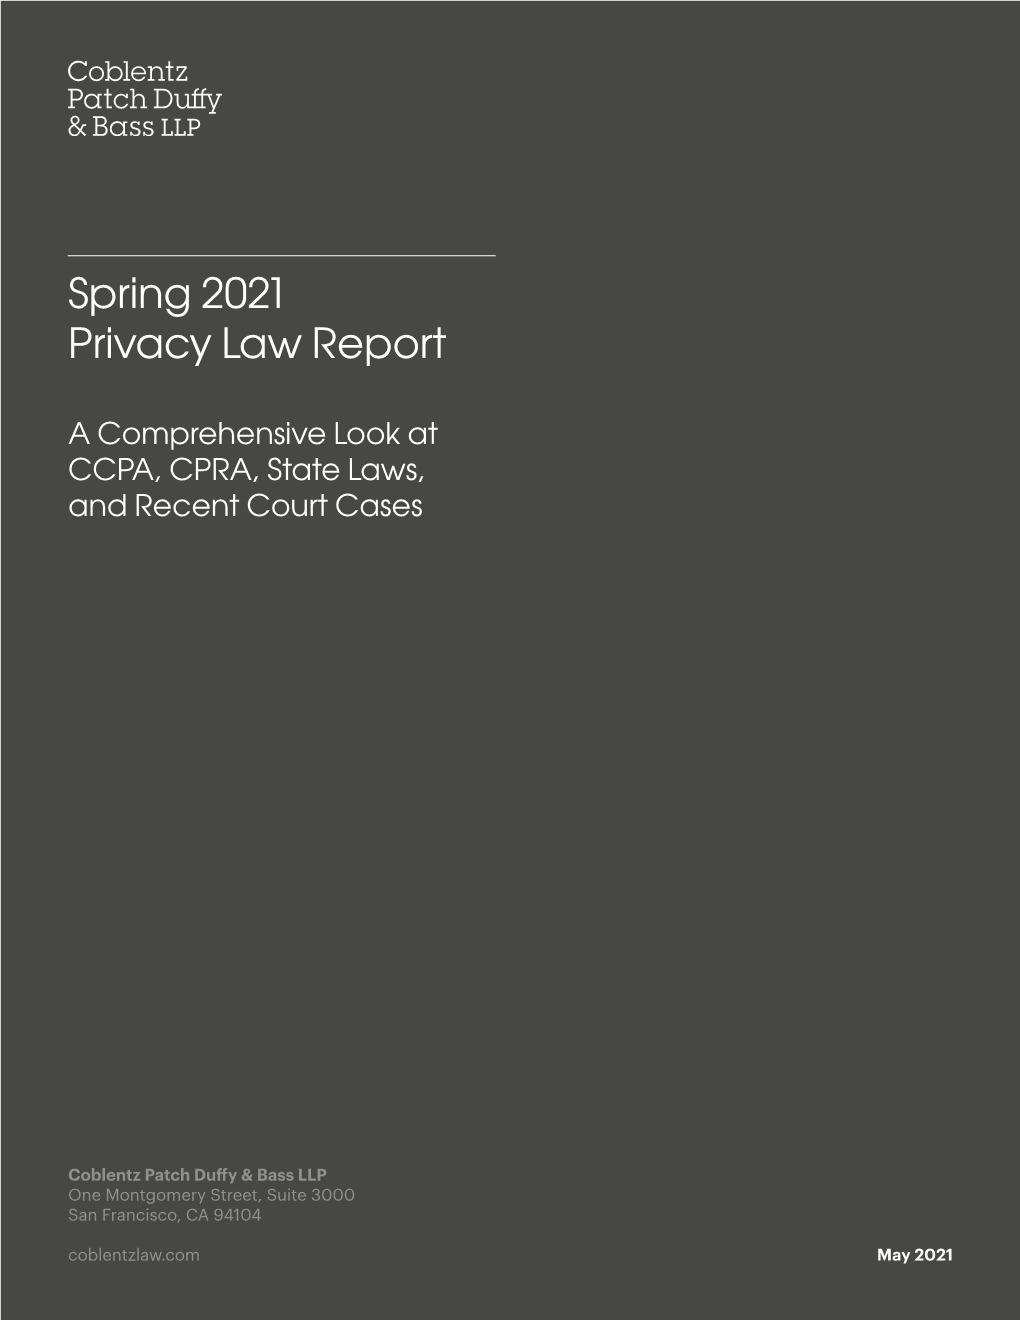 Spring 2021 Privacy Law Report